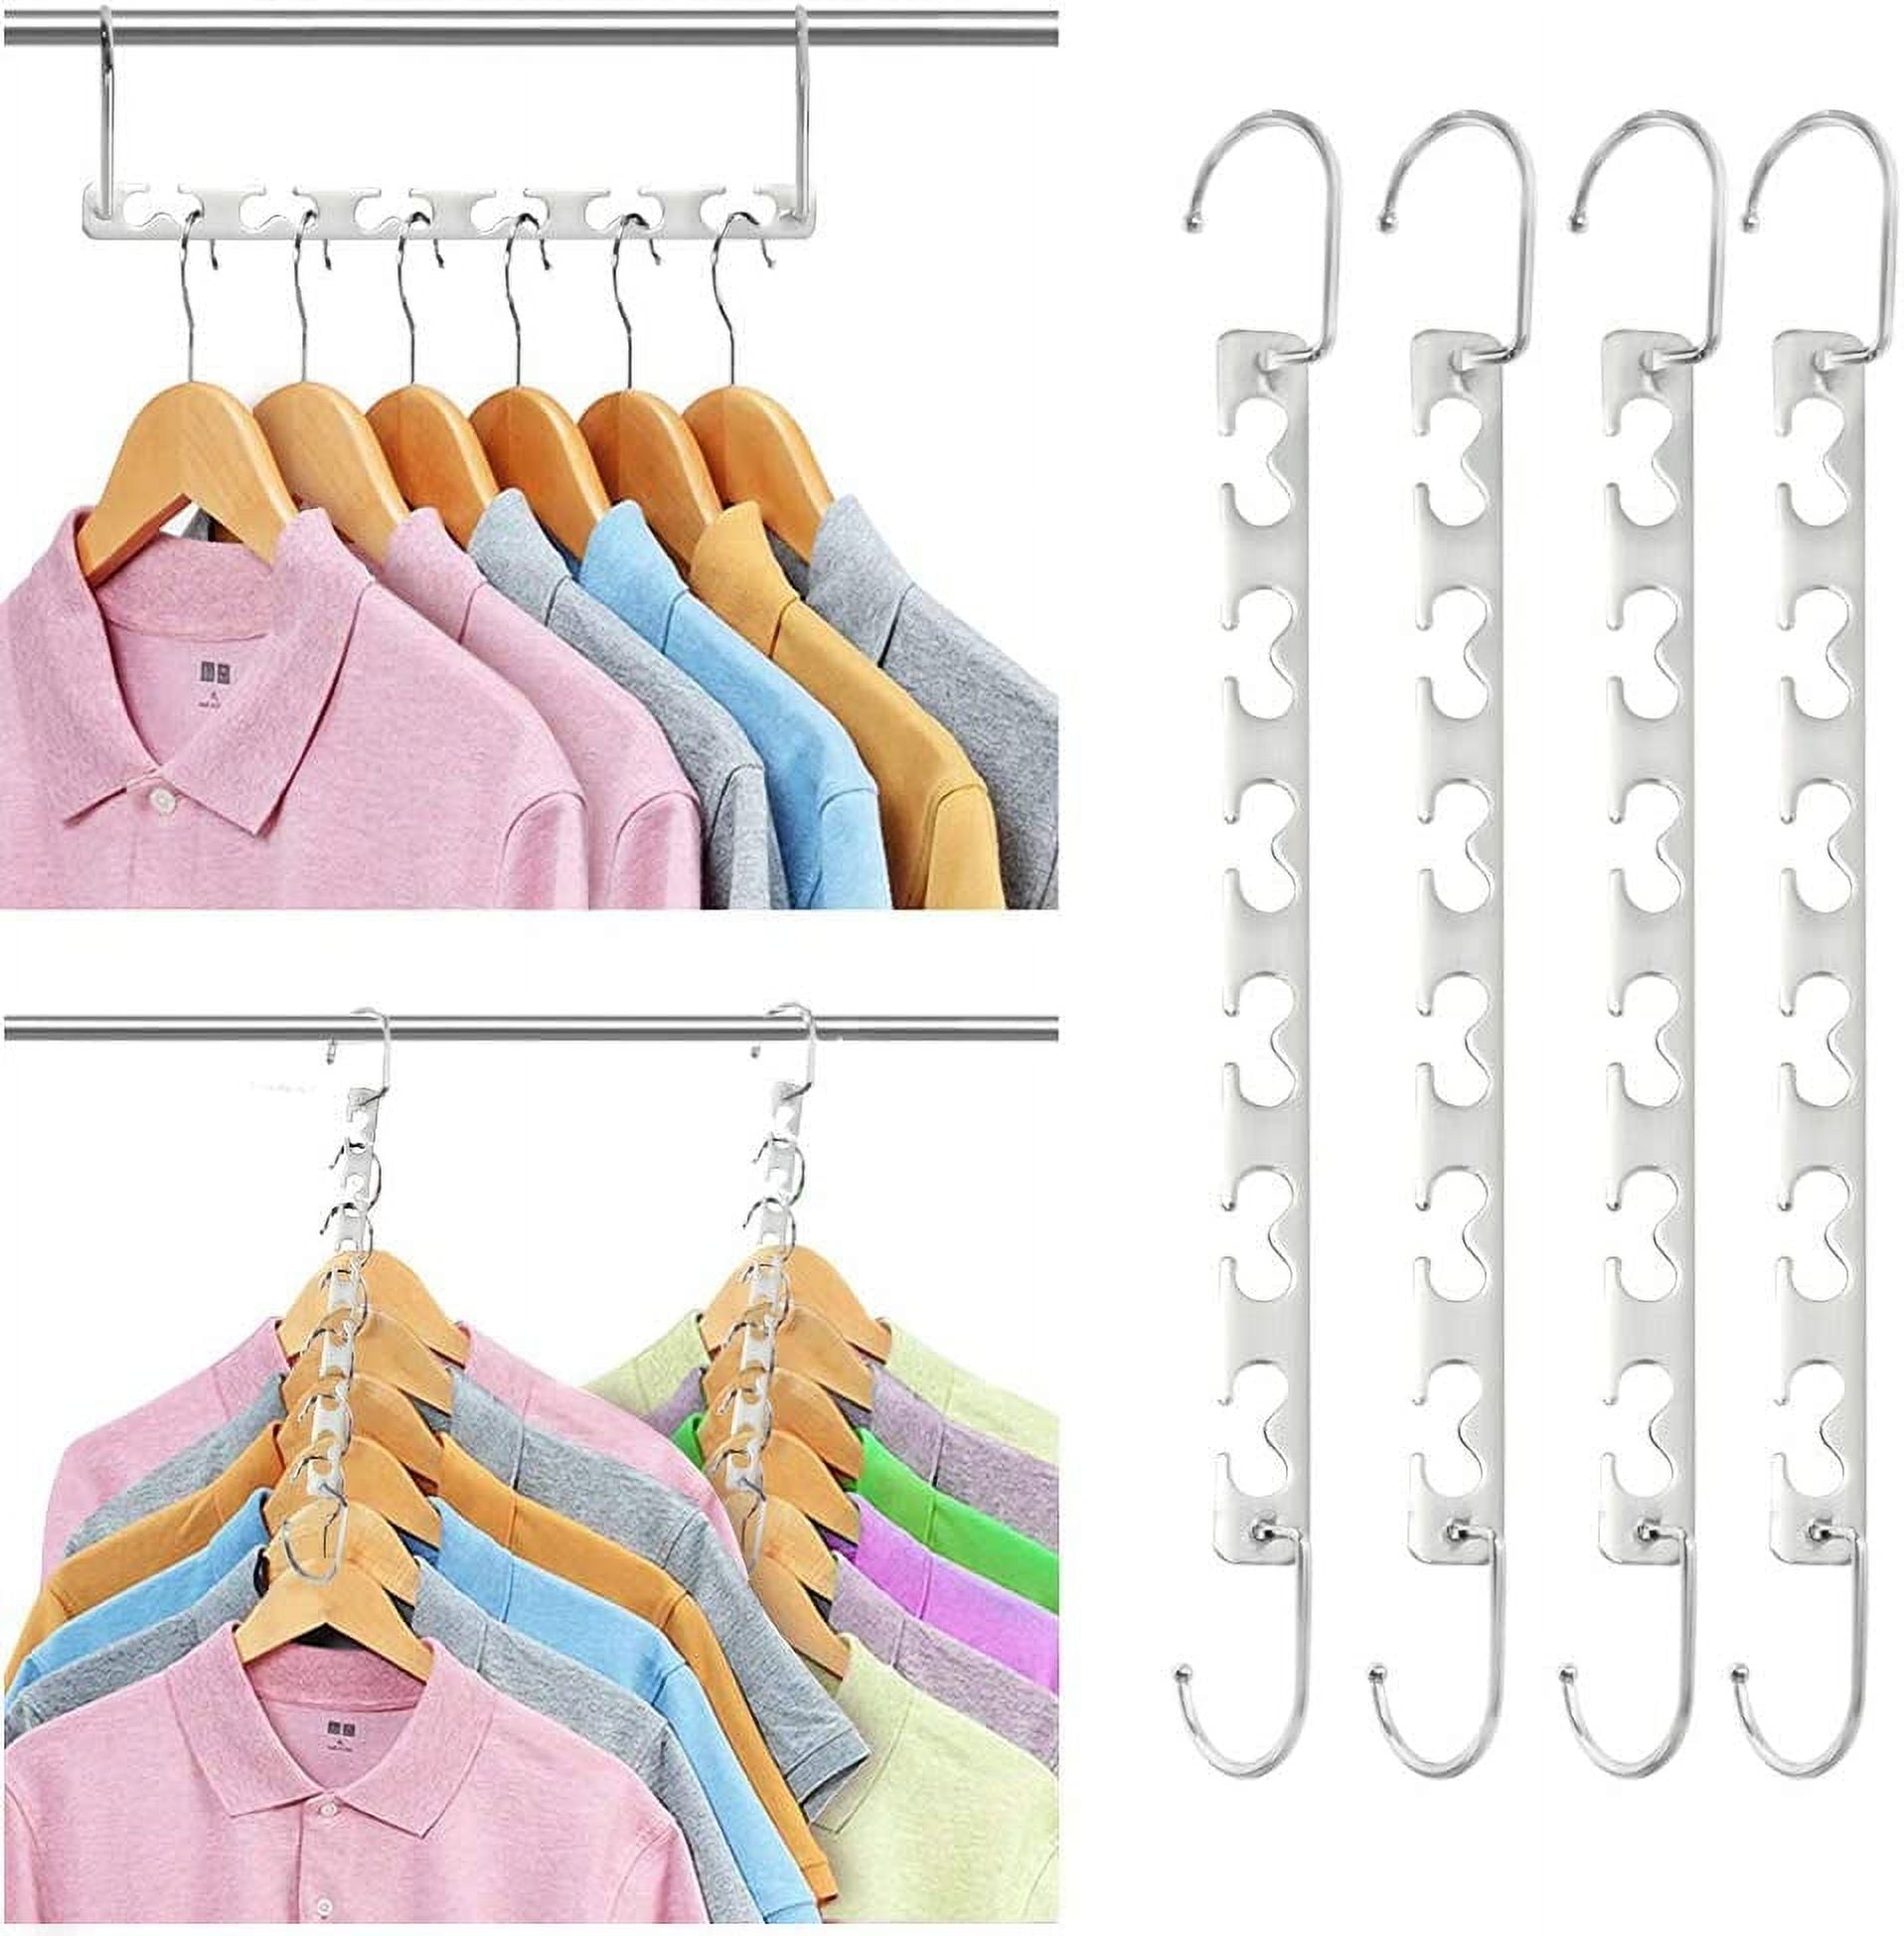 Smartor Hangers Space Saving - Plastic, 10 Pack Magic Hangers, Closet  Organizers and Storage for Clothes Organizer, Hanger Organizer, Closet  Hangers